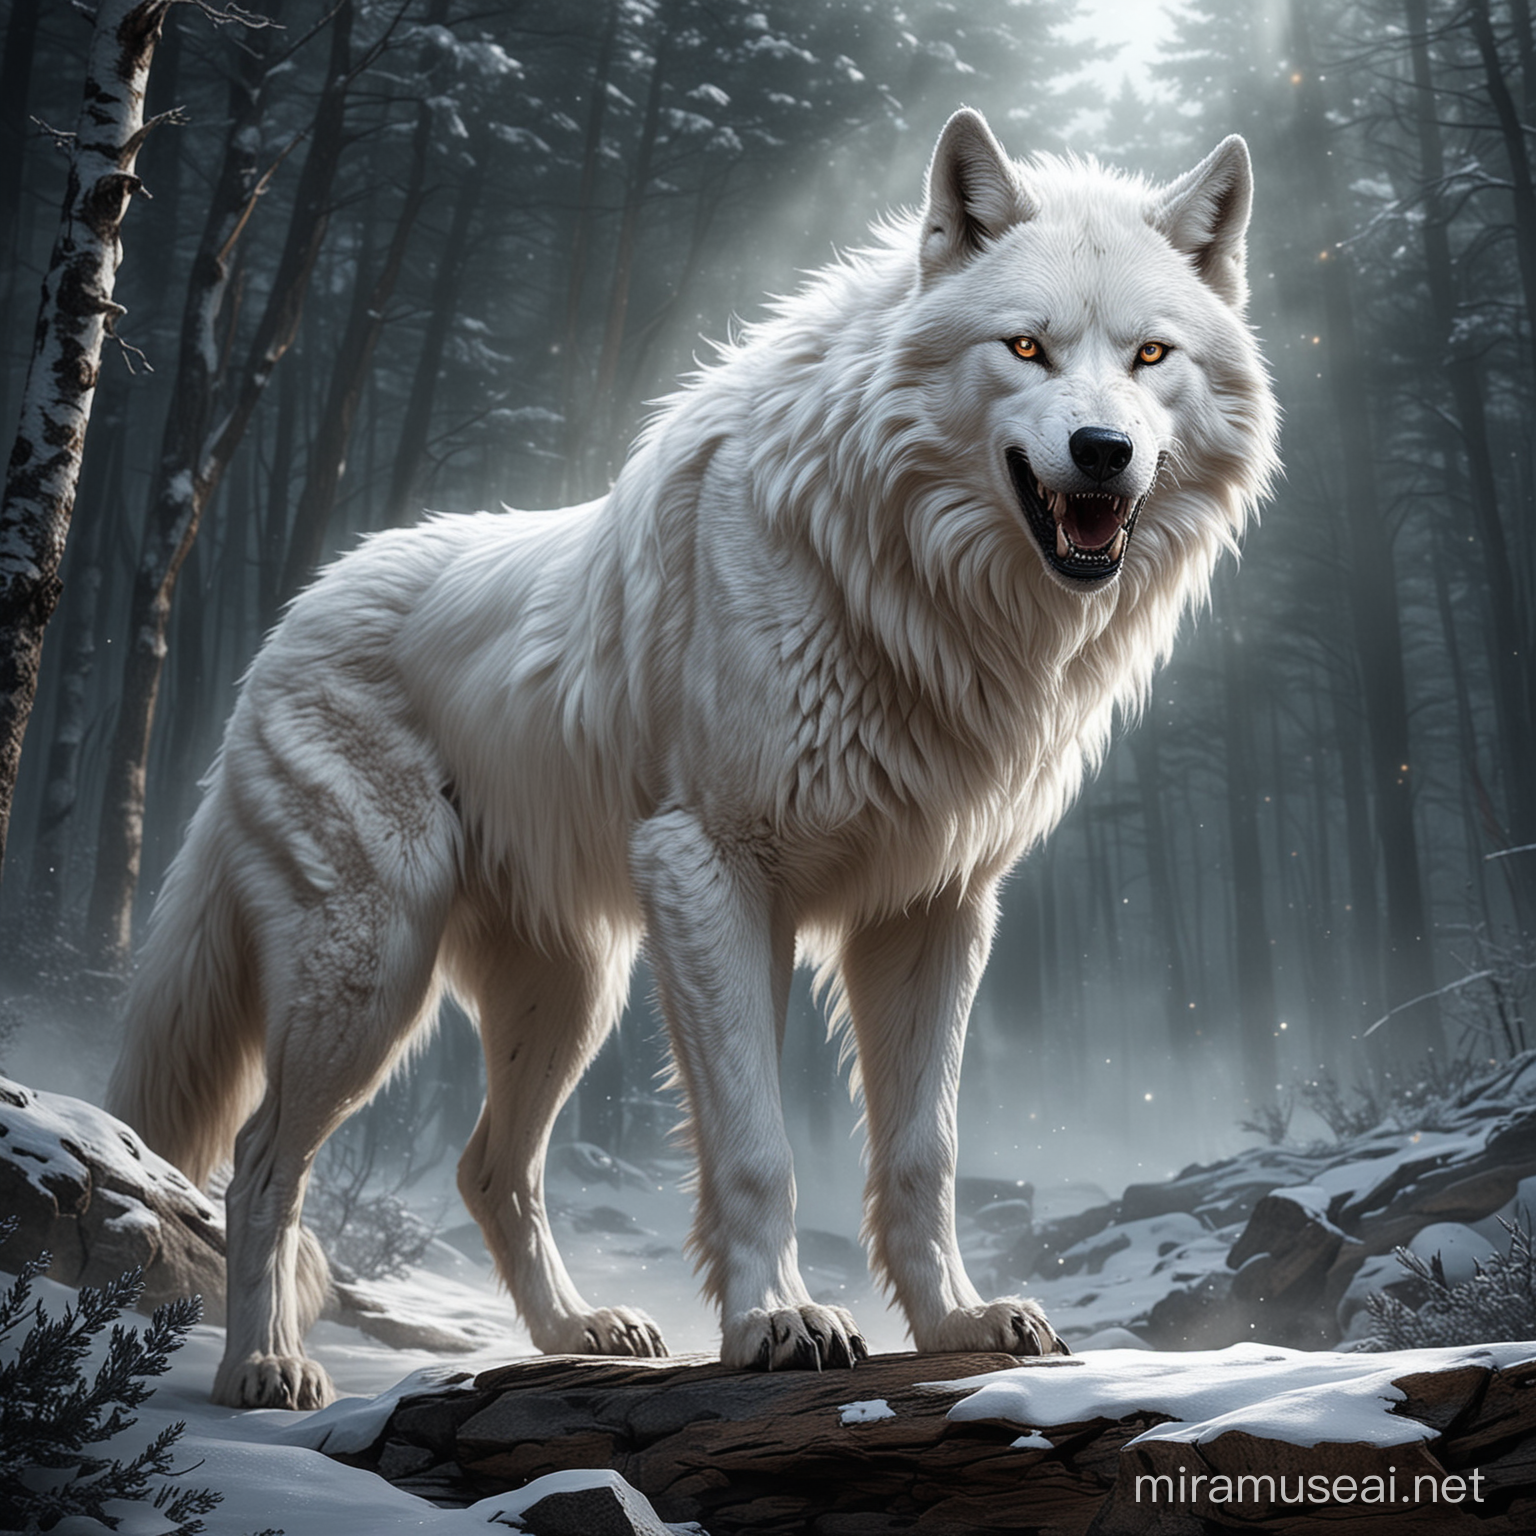 Fenrir is a huge hairy beast, resembling a giant wolf. He has shining white fur